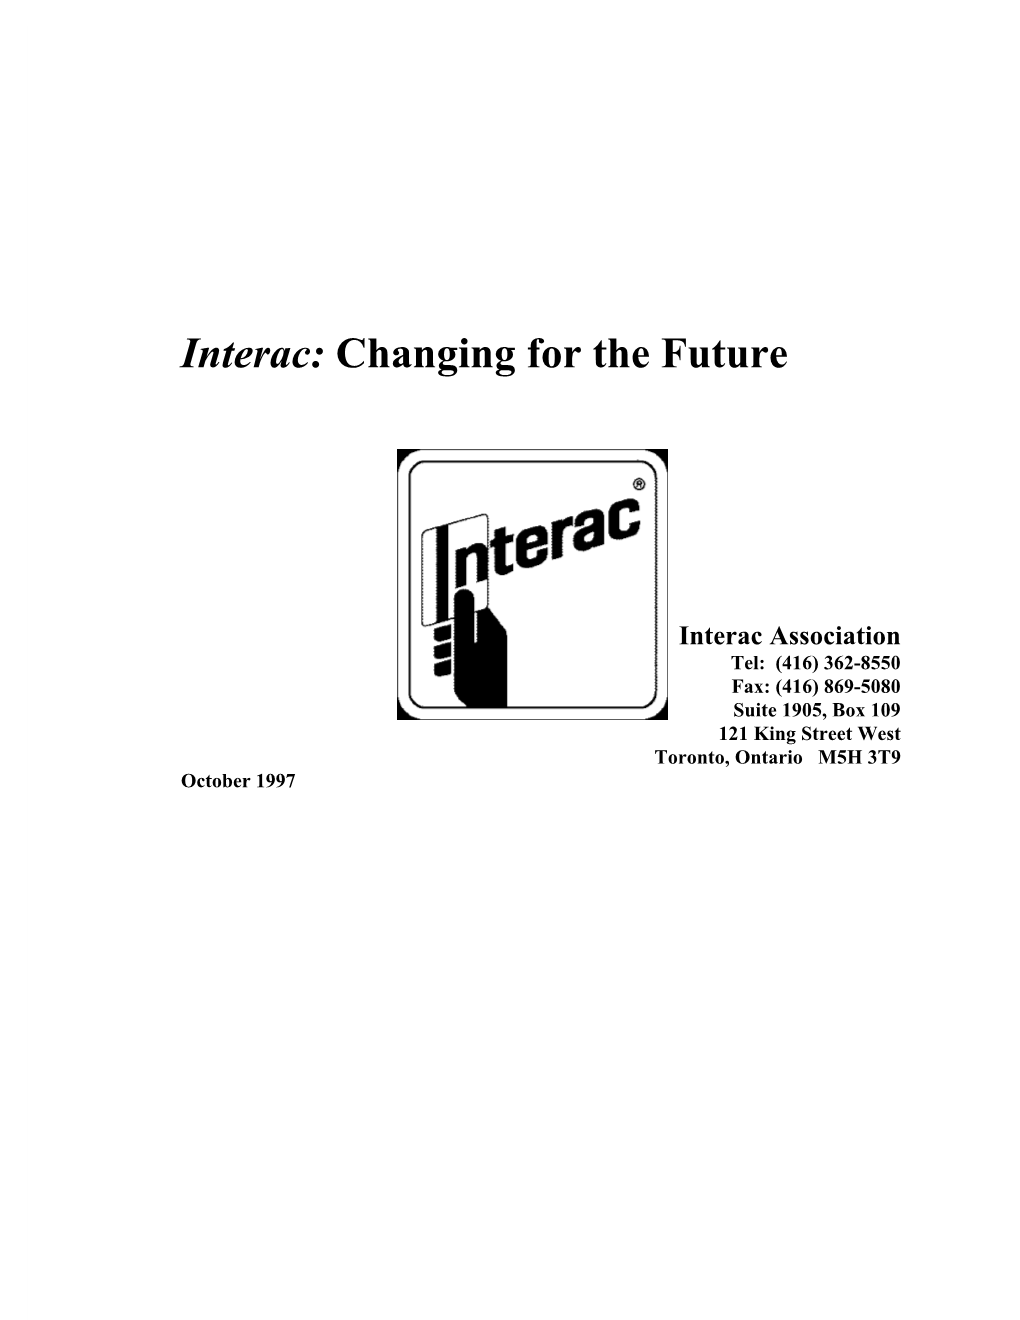 Interac: Changing for the Future